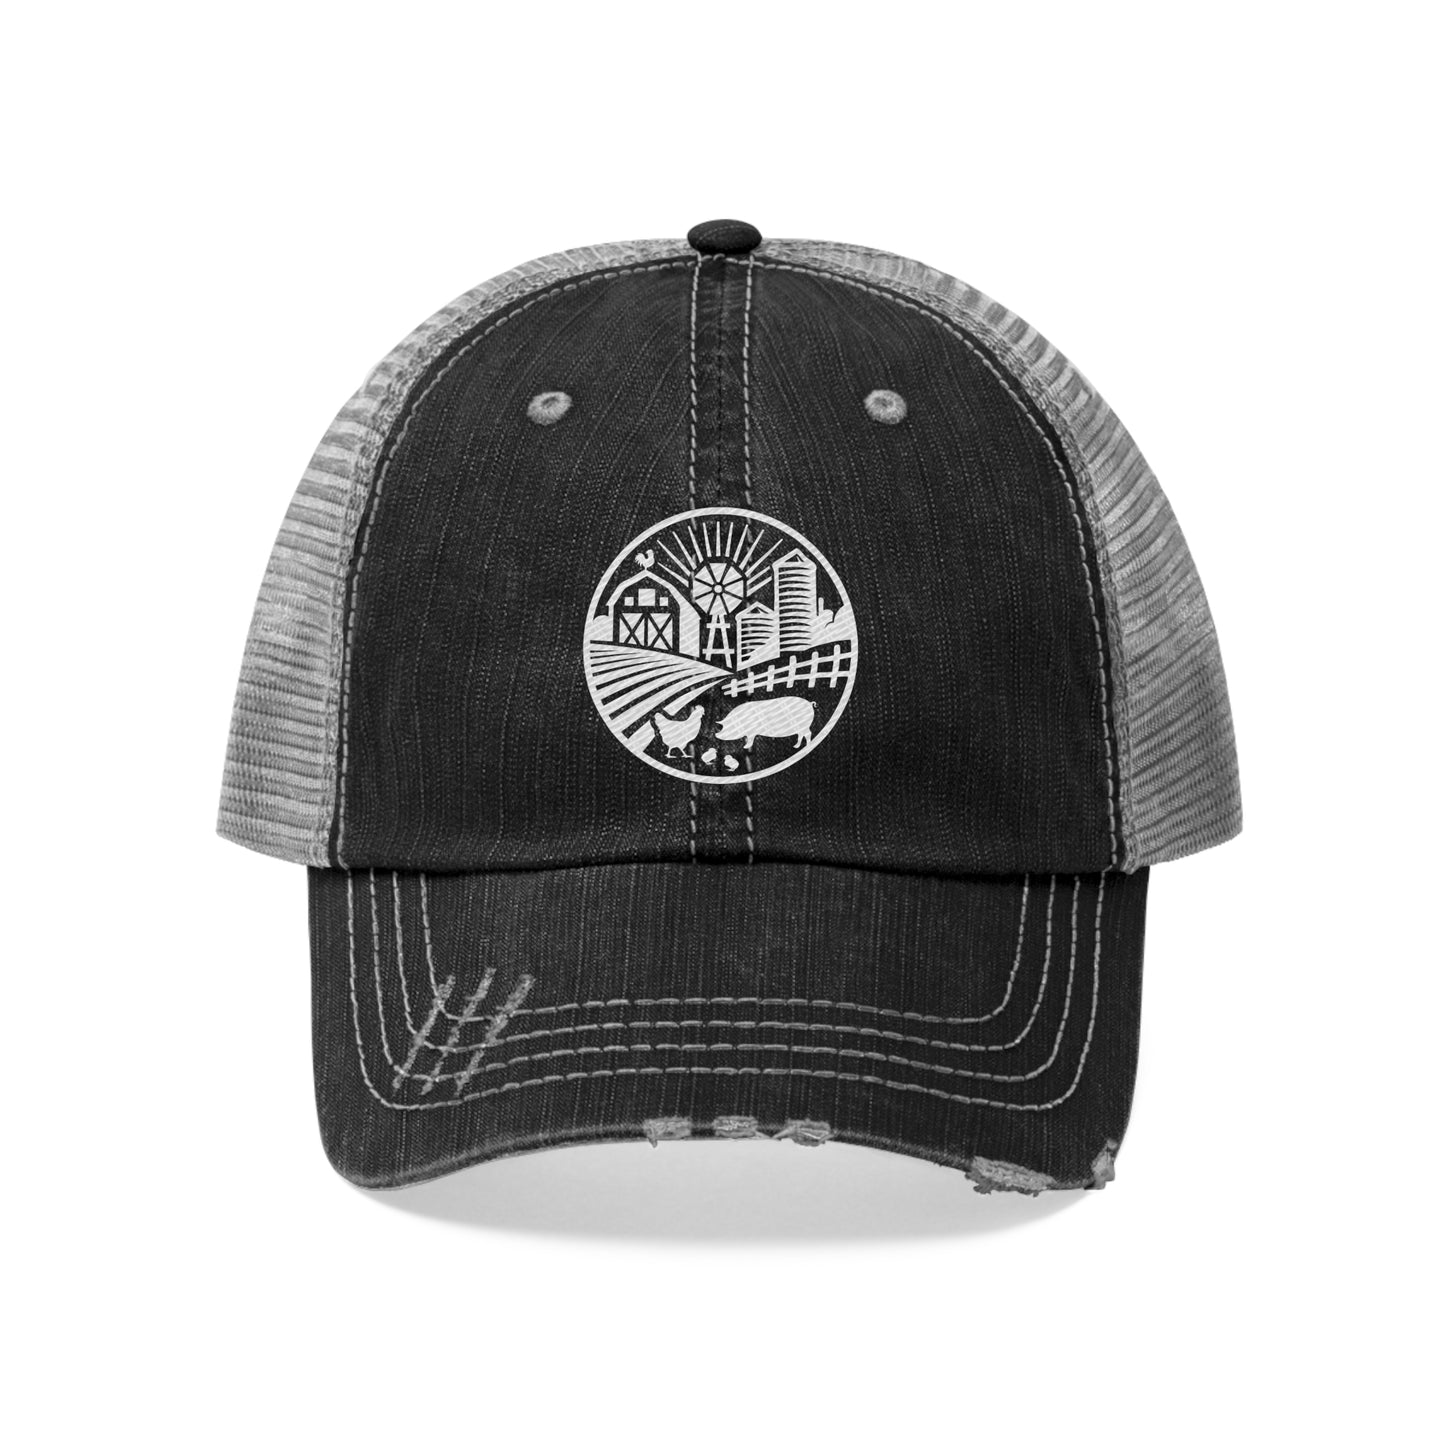 Farm Where You Live Distressed Hat